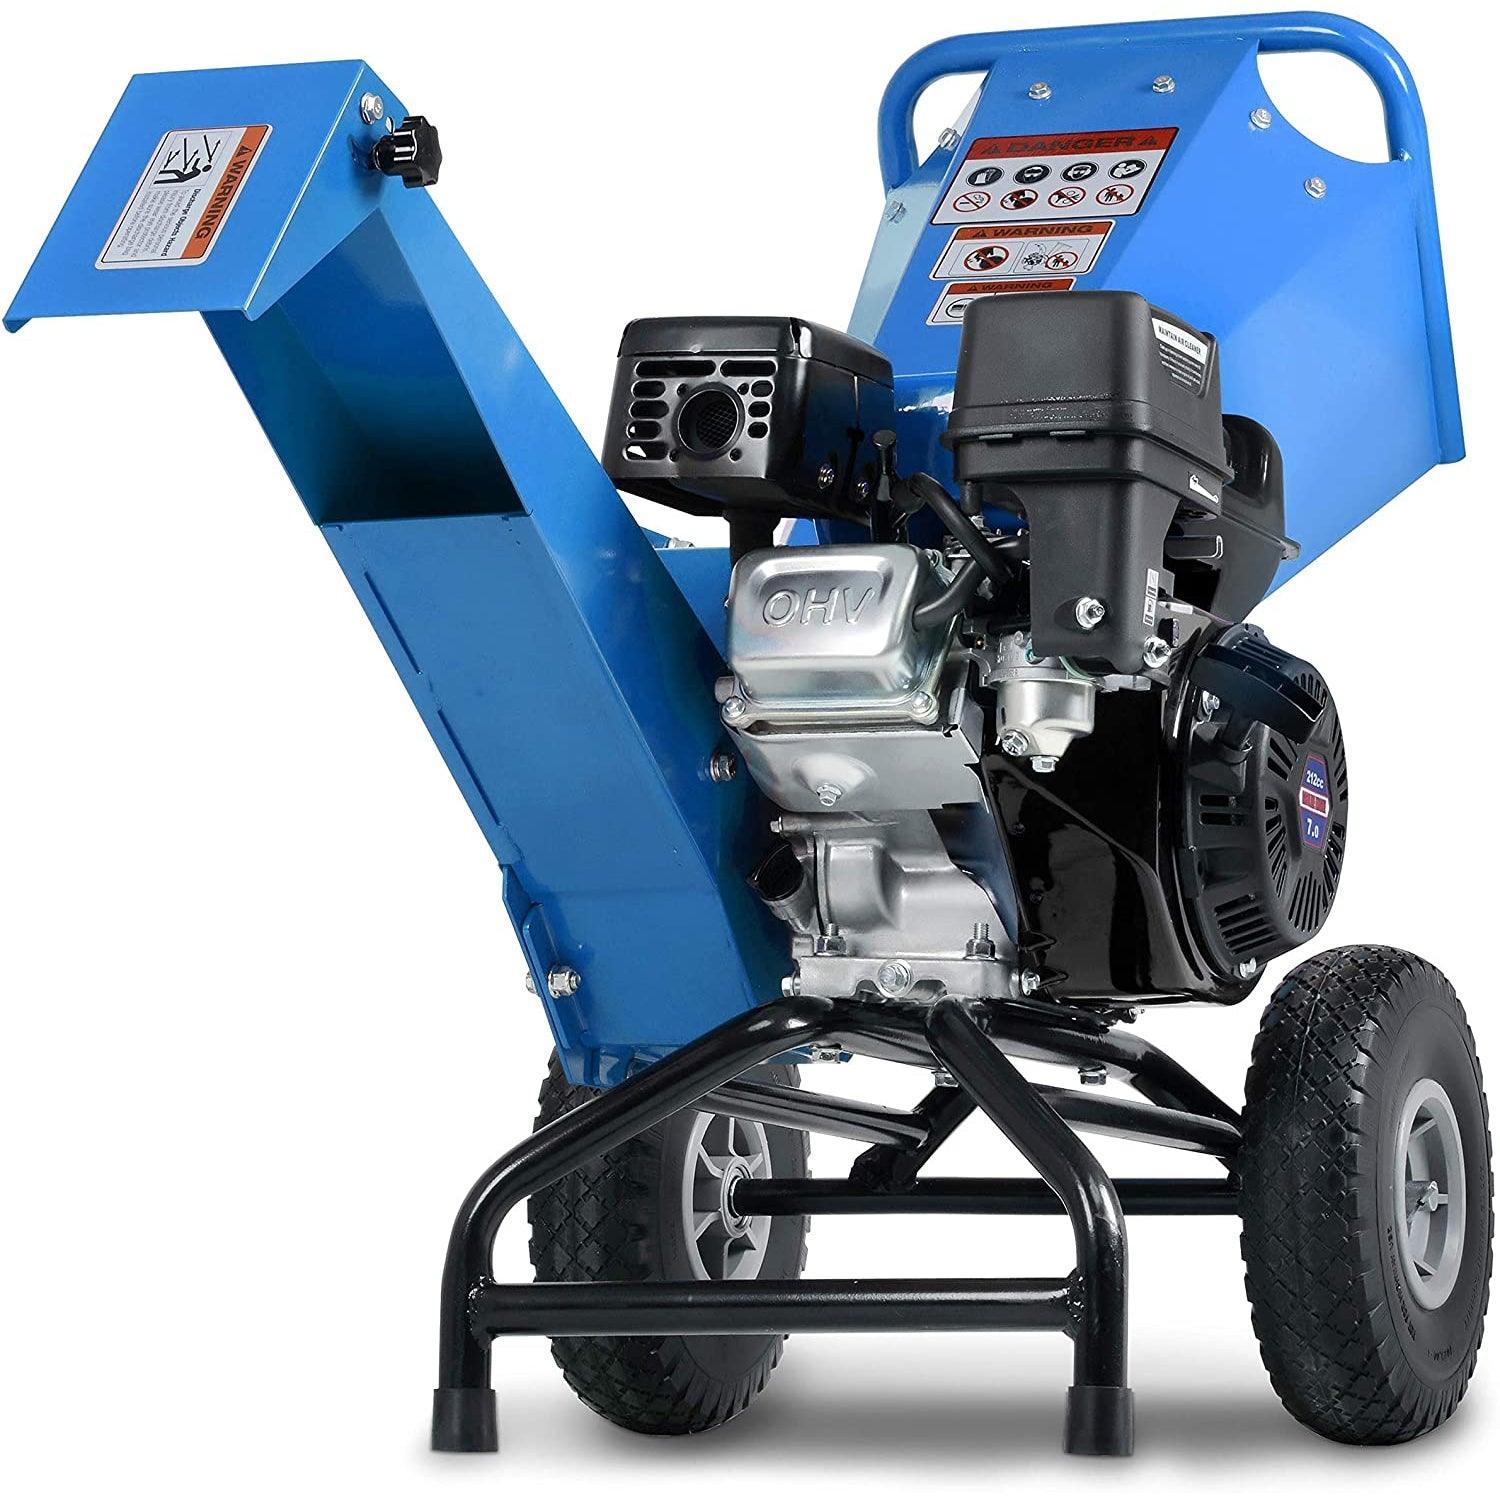 Landworks Compact Wood Chipper - 7HP Gas Engine, Adjustable Exit Chute, 3" Max Branch Diameter (Blue) - DIY Tools by GreatCircleUS